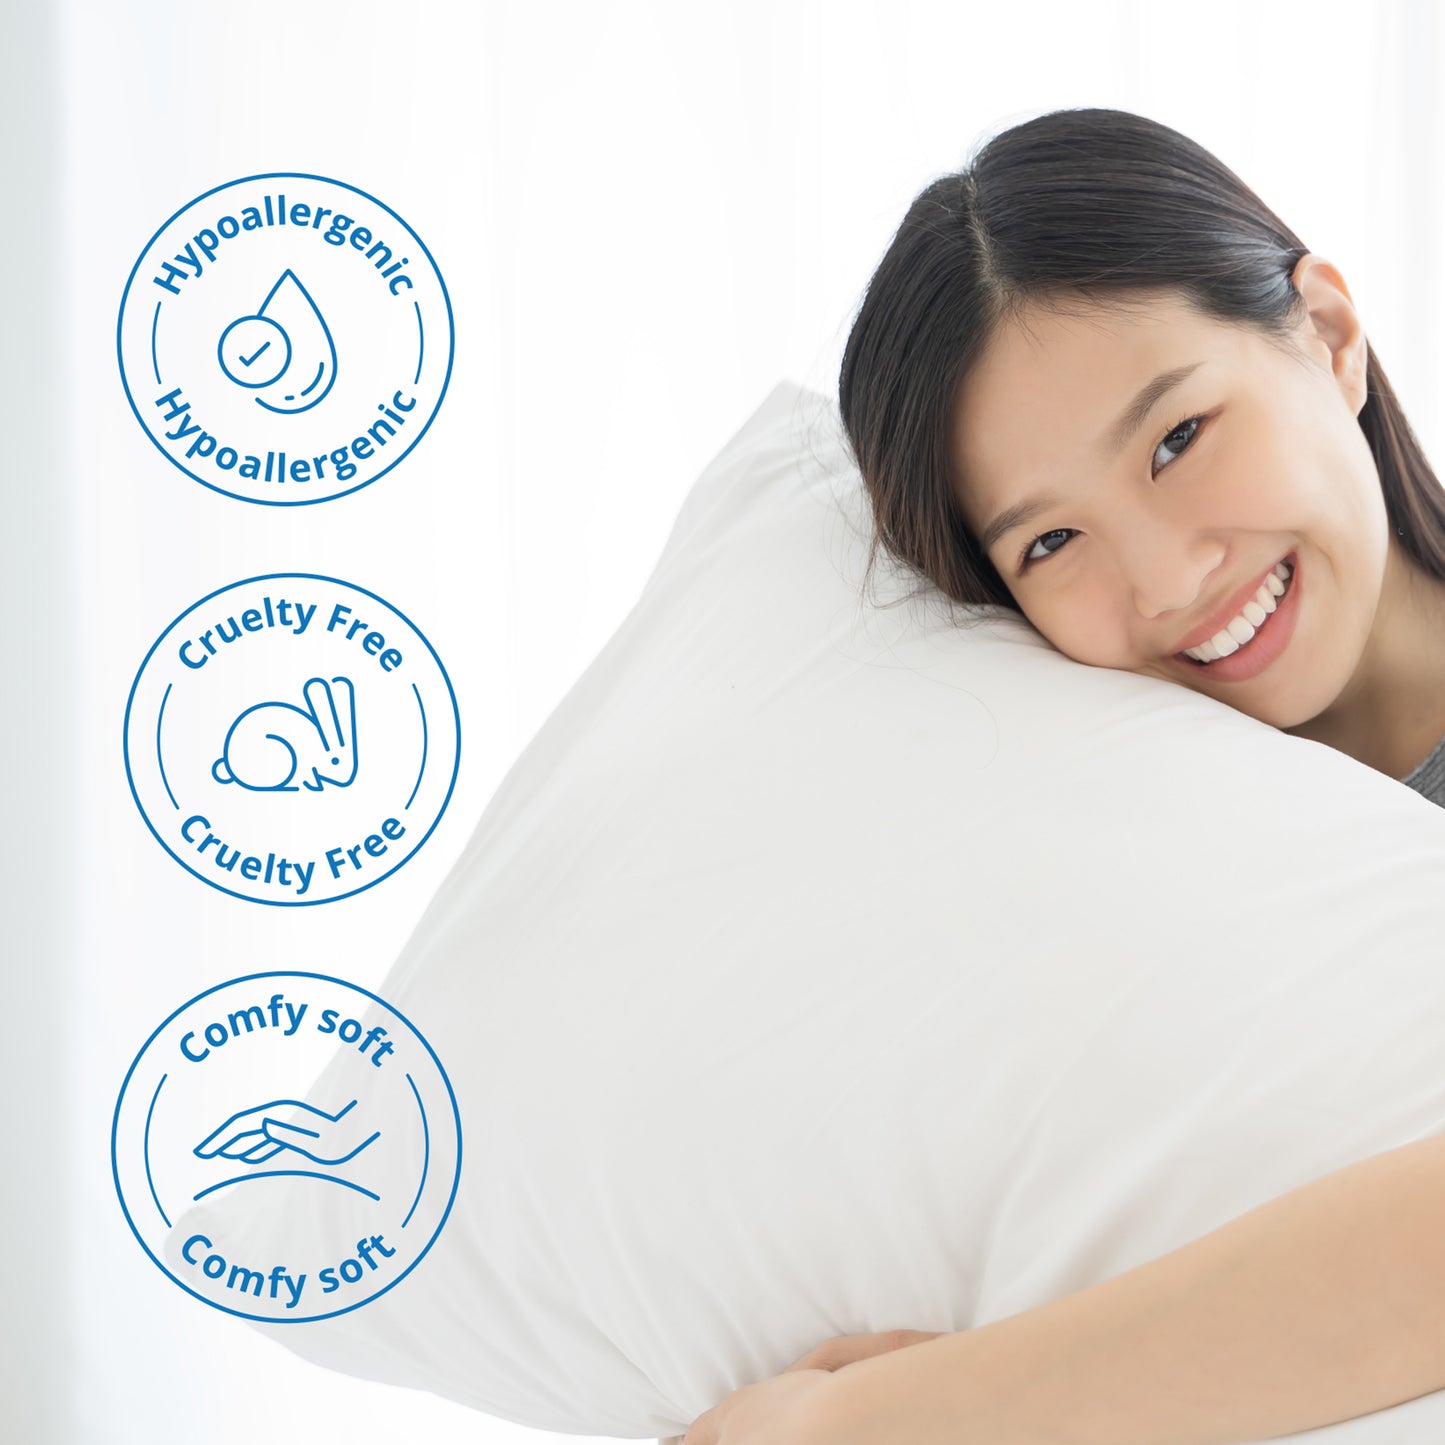 Waterproof, Allergy & Spill Mattress Protector & Pillow Protector Combo Back to College Special (Twin XL)